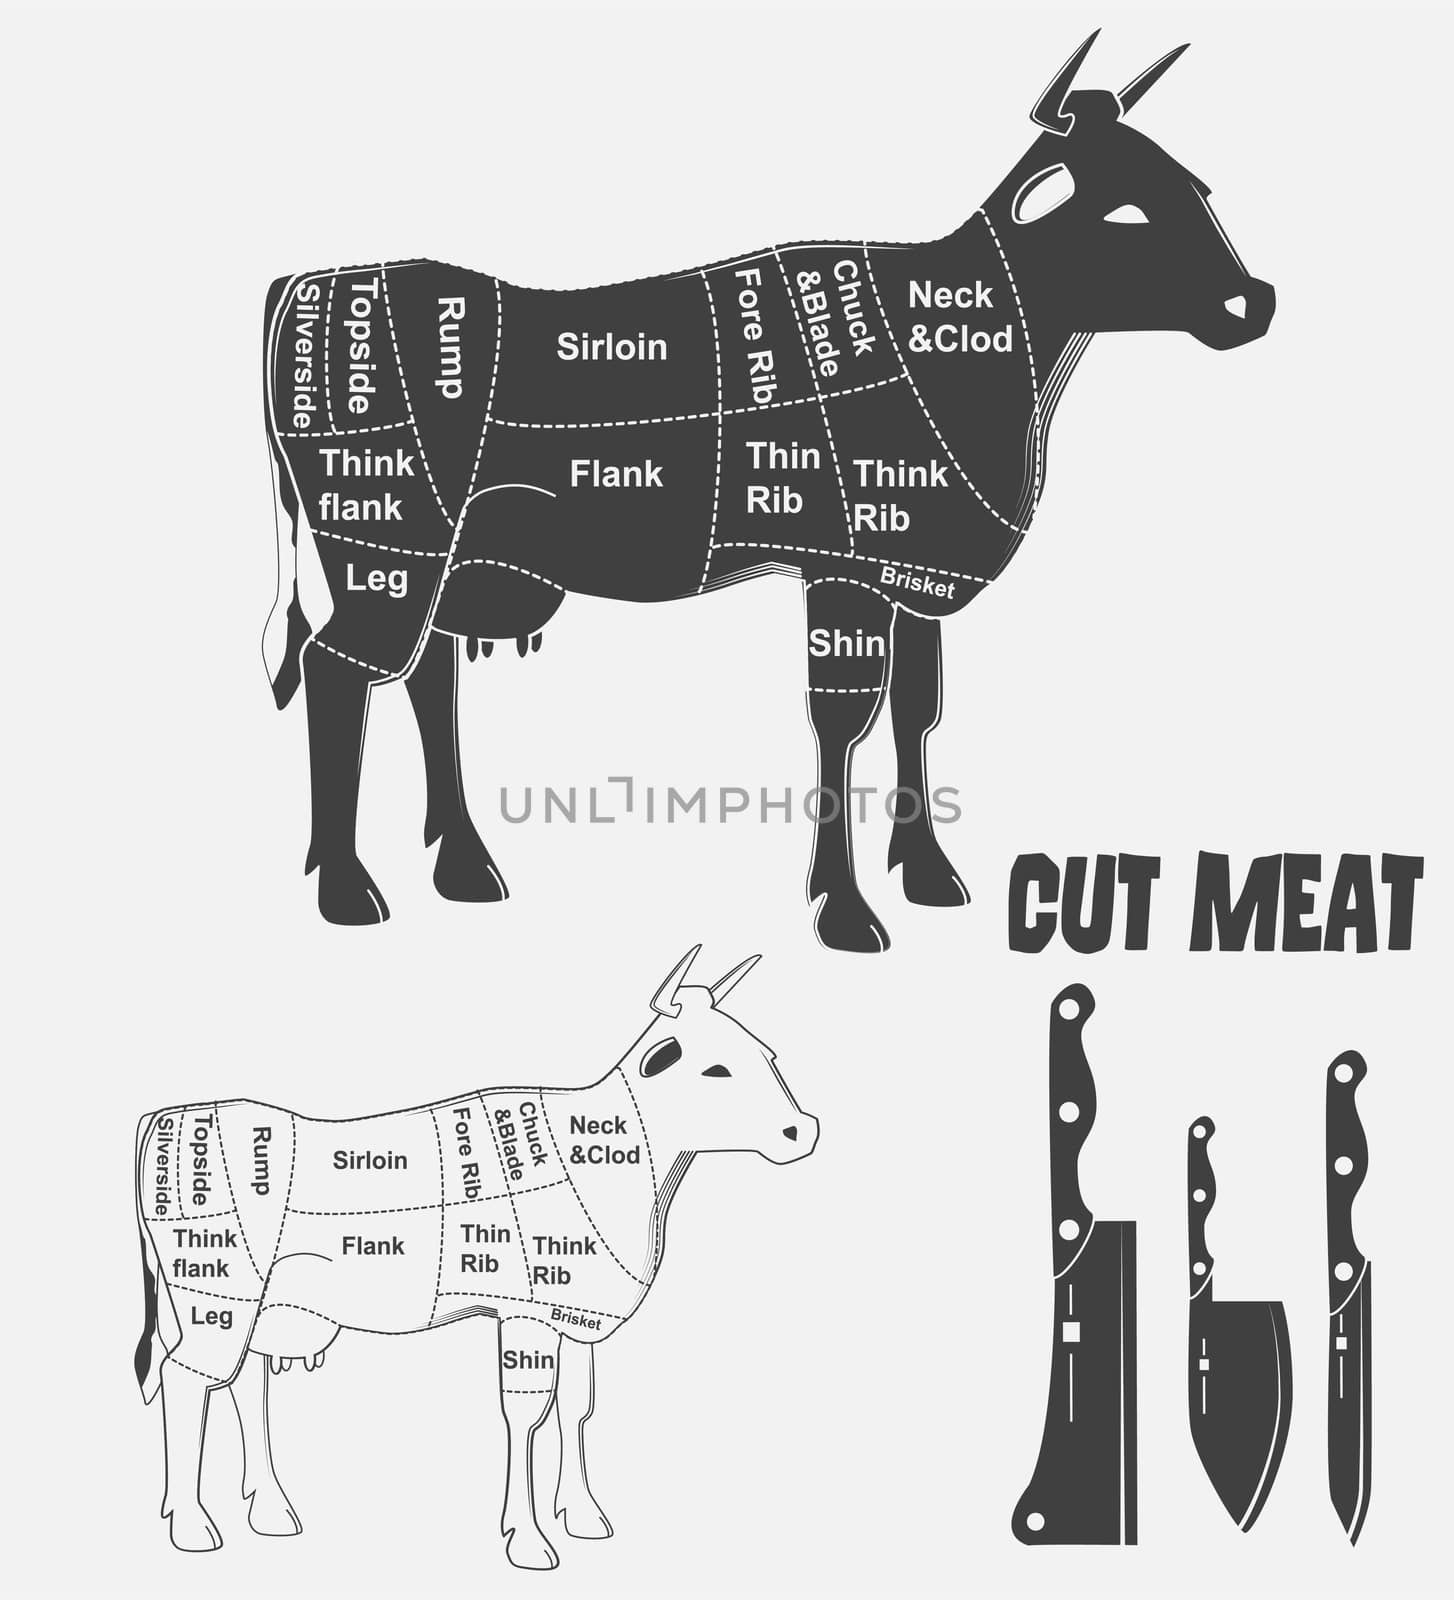 British cuts of veal, beef or animal diagram meat. illustration